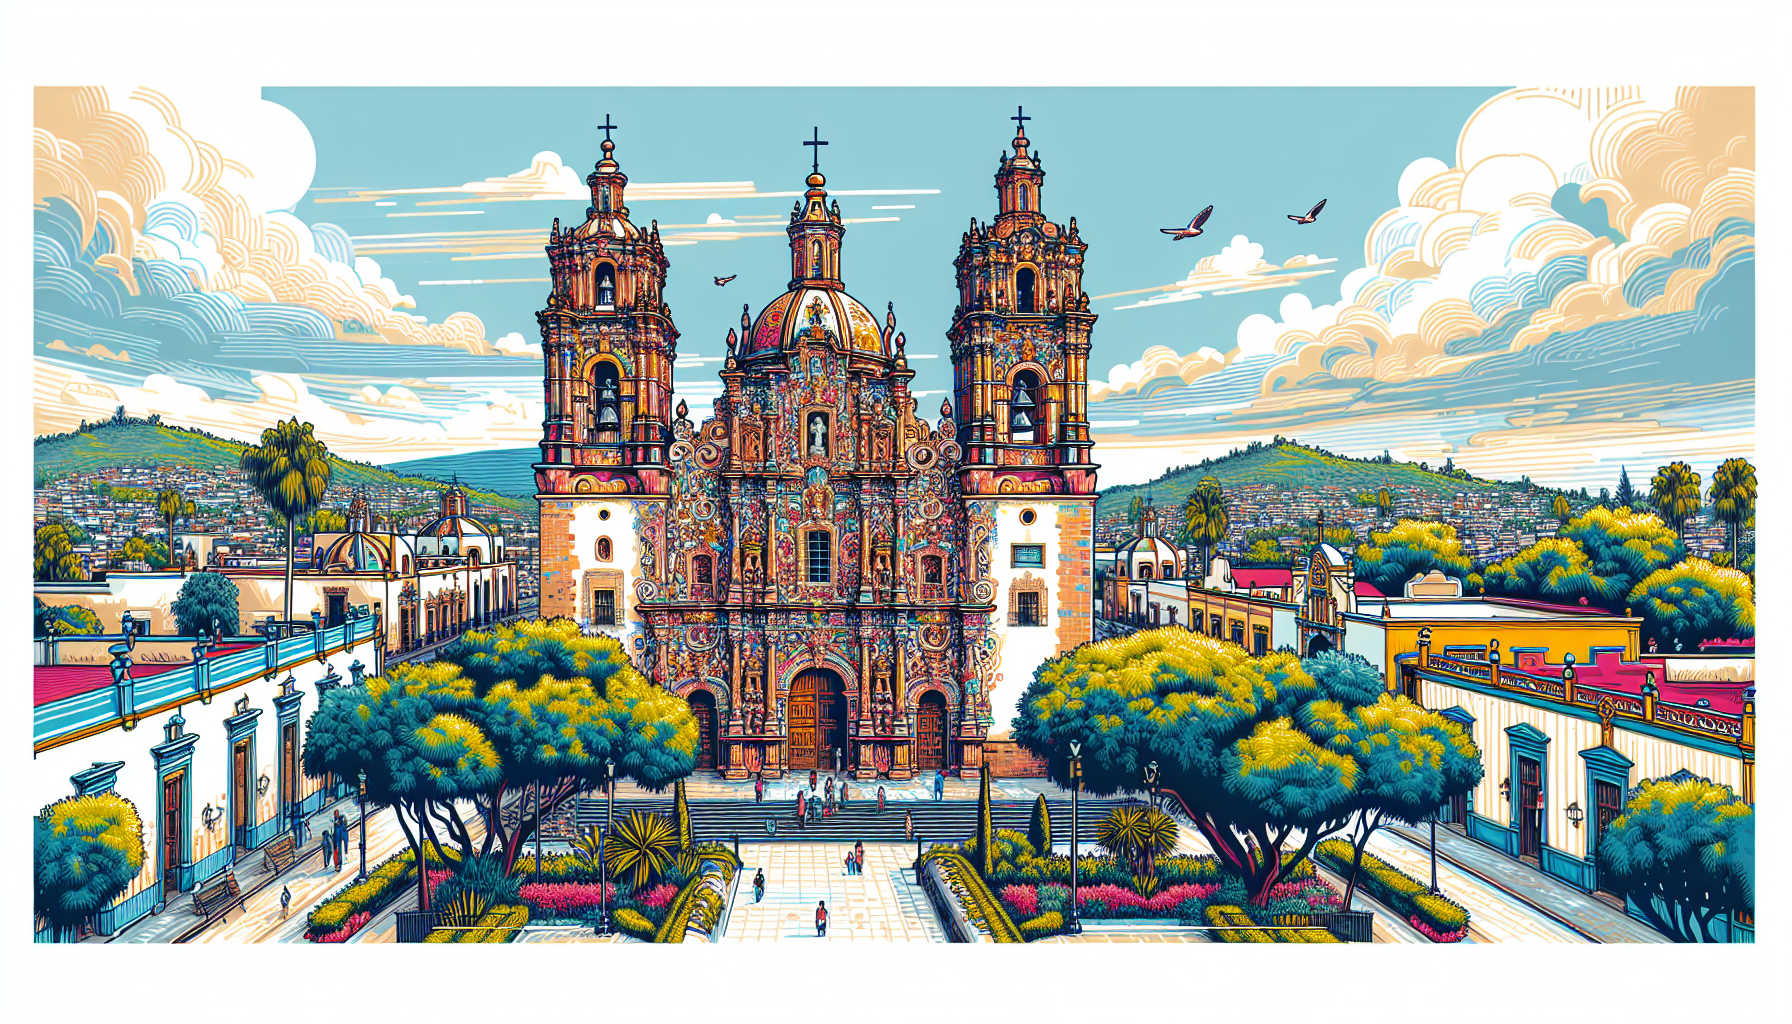 Create an image of a breathtaking colonial church in Aguascalientes, Mexico. The church should be rich in architectural details, showcasing intricate stonework and vibrant colors. The setting should i